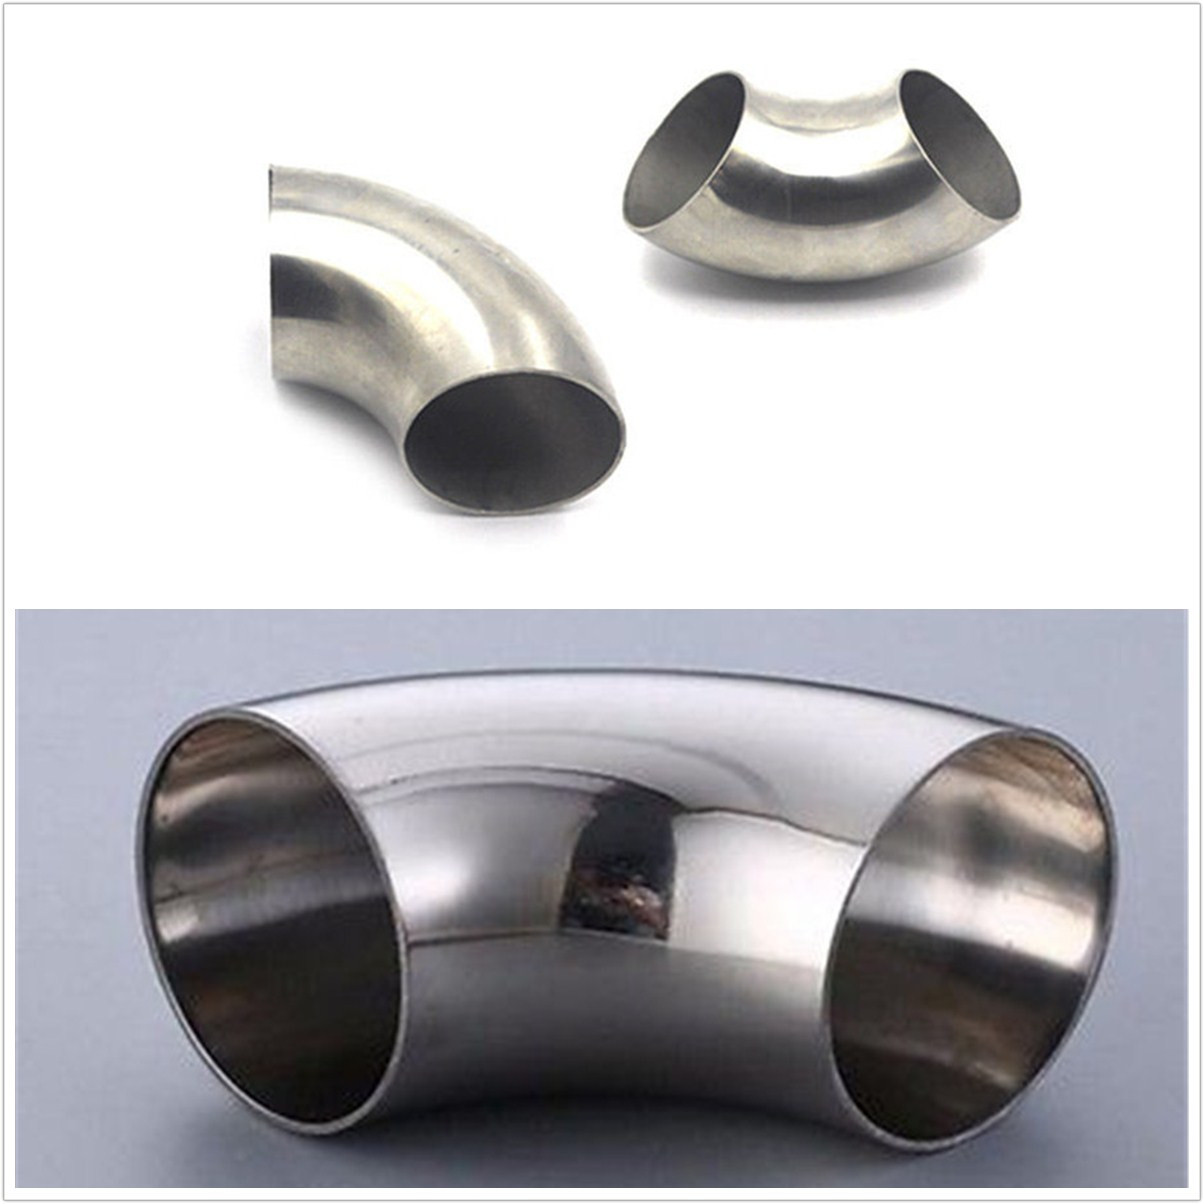 Exhaust 2 Inch//51mm Stainless Steel Elbow Fitting 90° Pipe Tube Bend Pro For Car